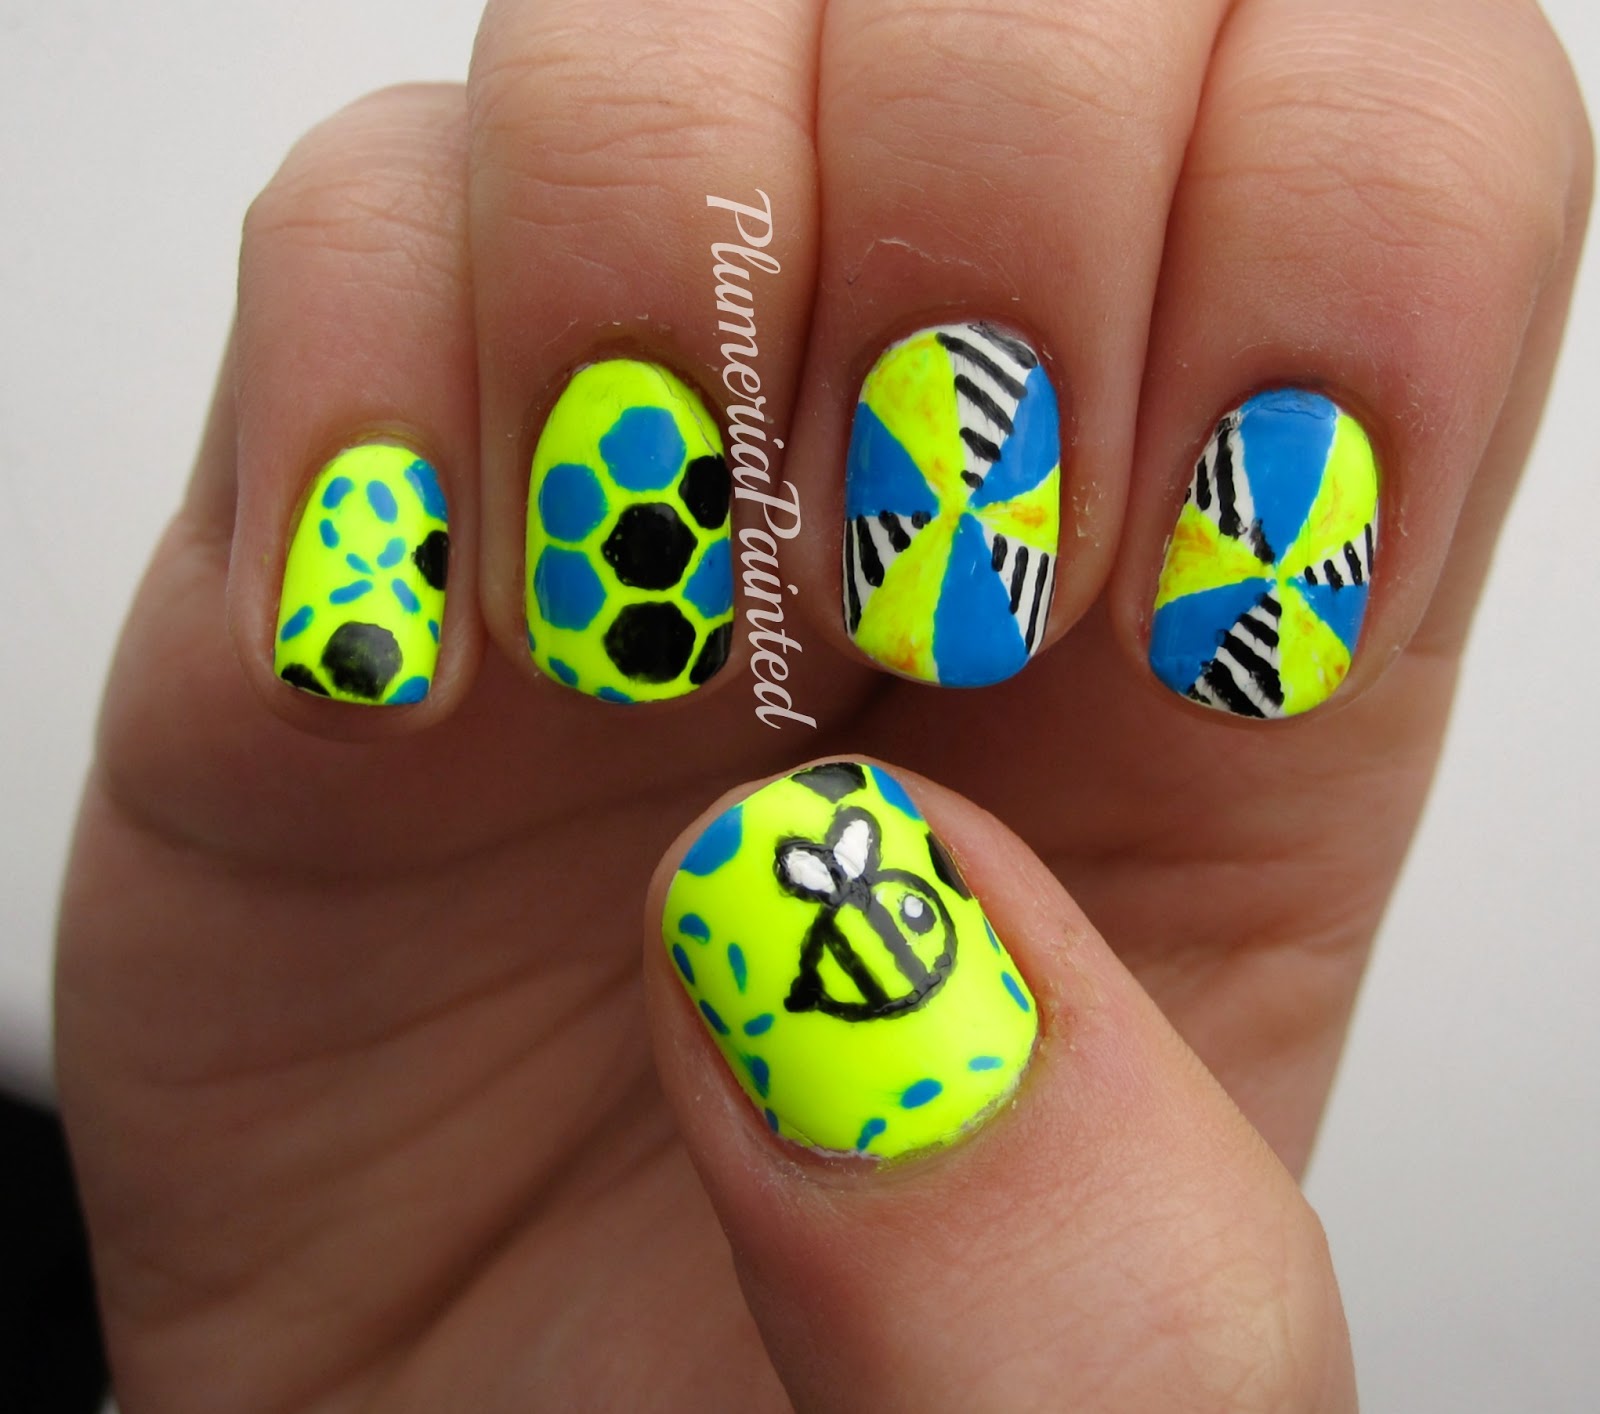 PlumeriaPainted: The most stylish bee (nail art) you'll ever see